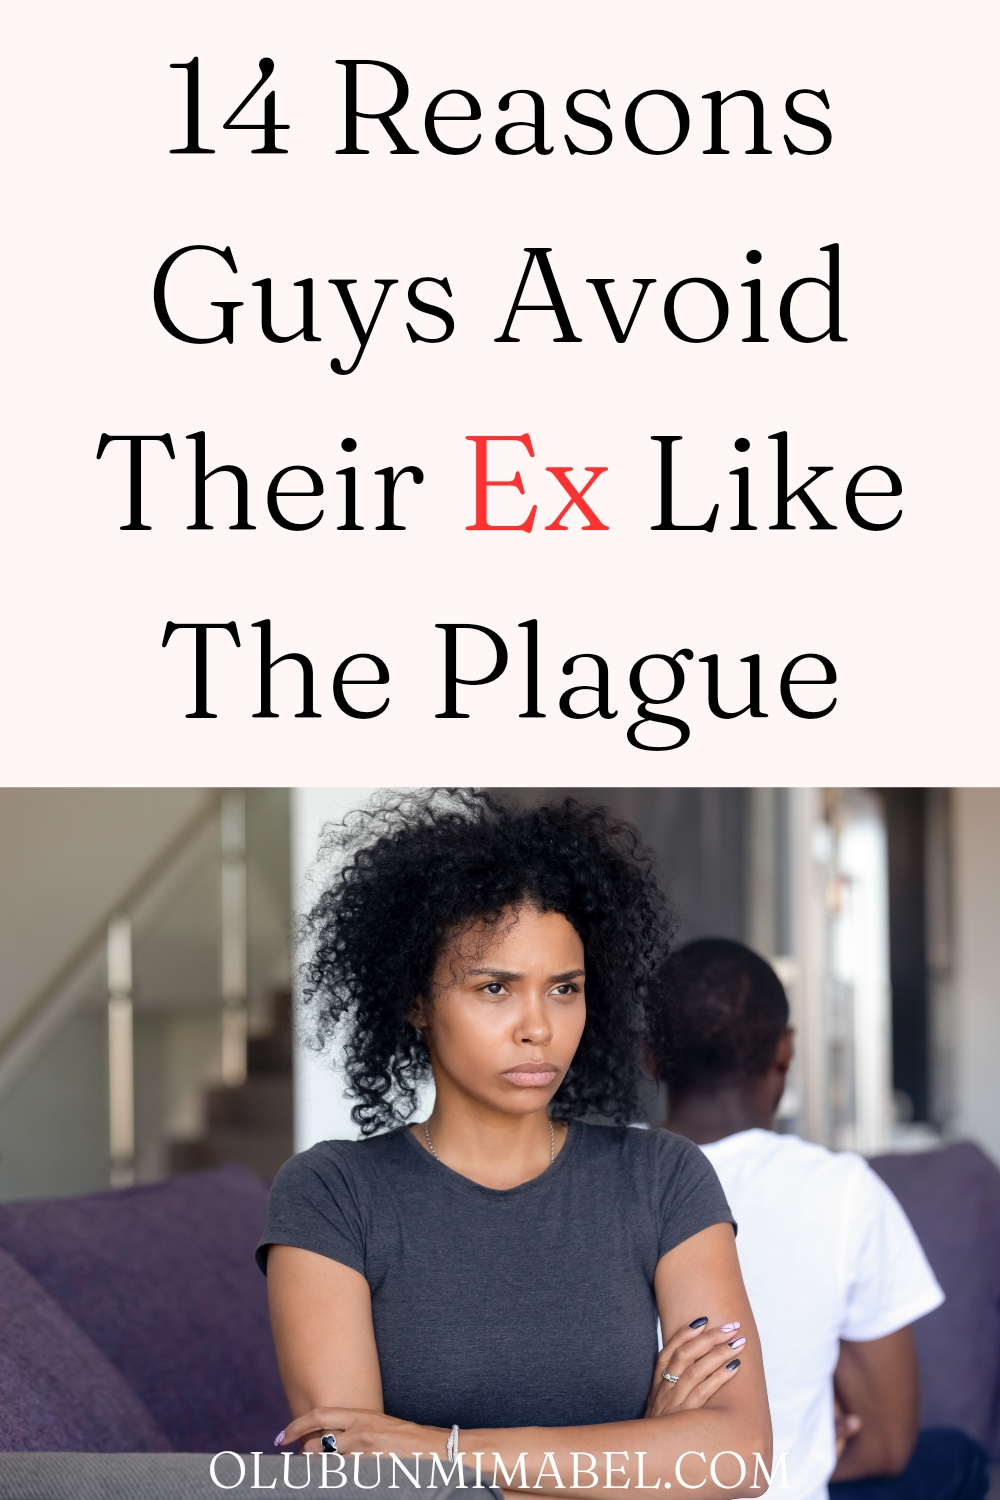 Why Do Guys Avoid Their Ex After a Breakup